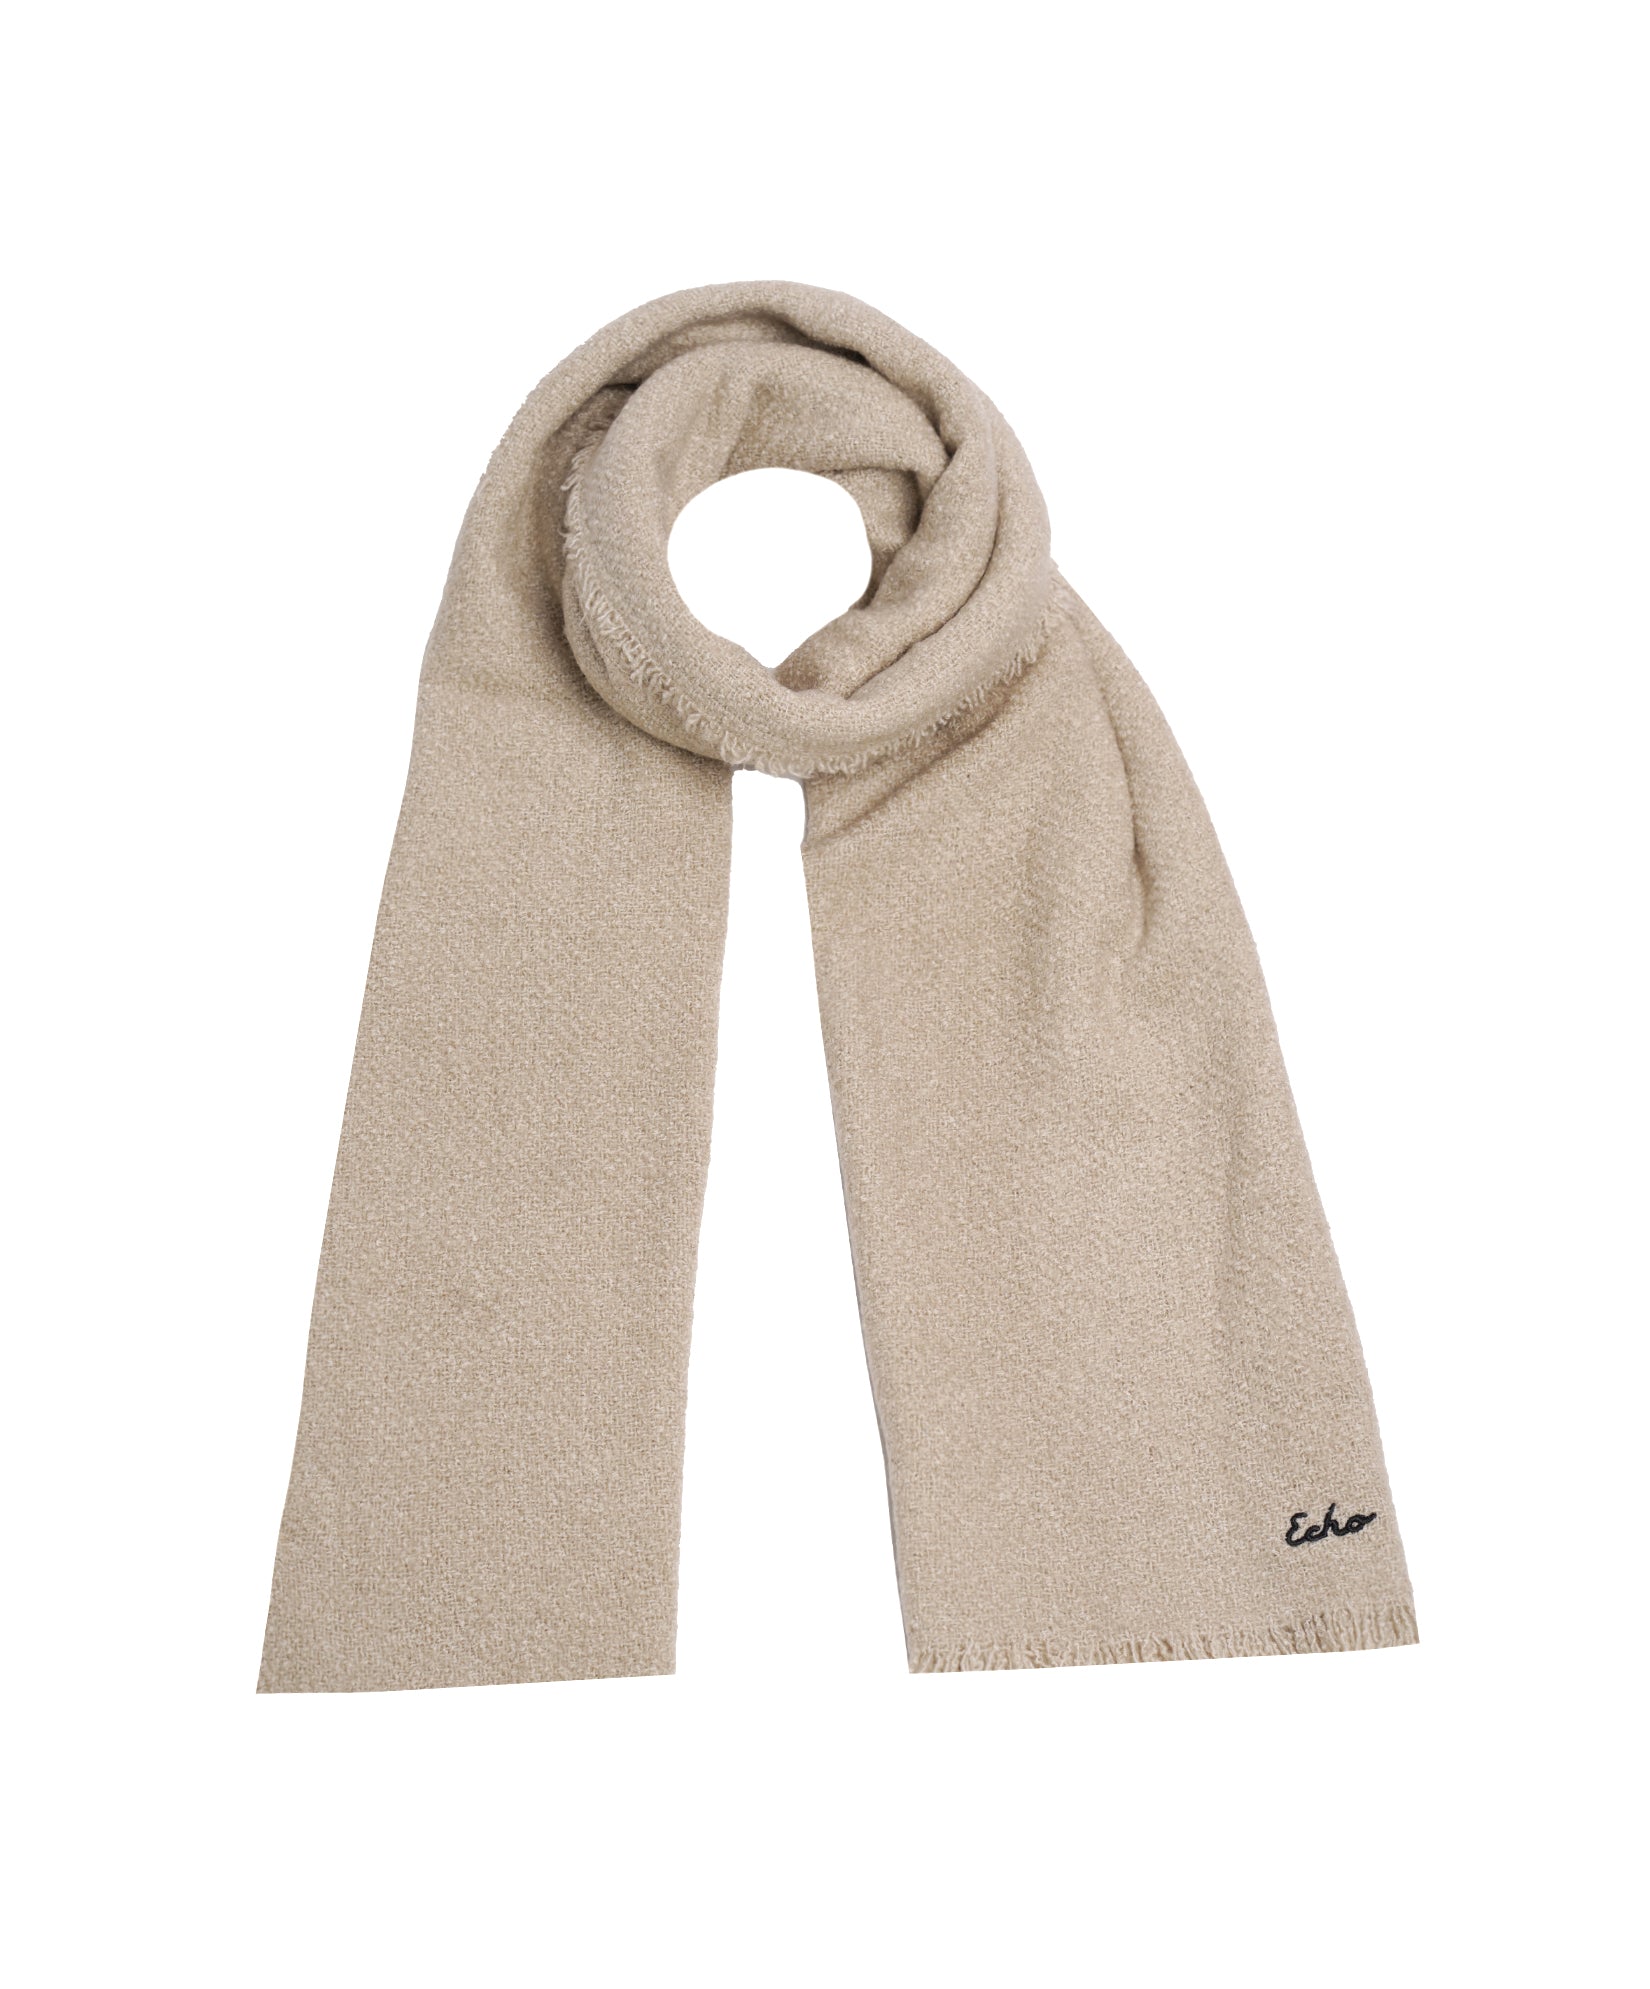 Plush Boucle Scarf in color Oatmeal